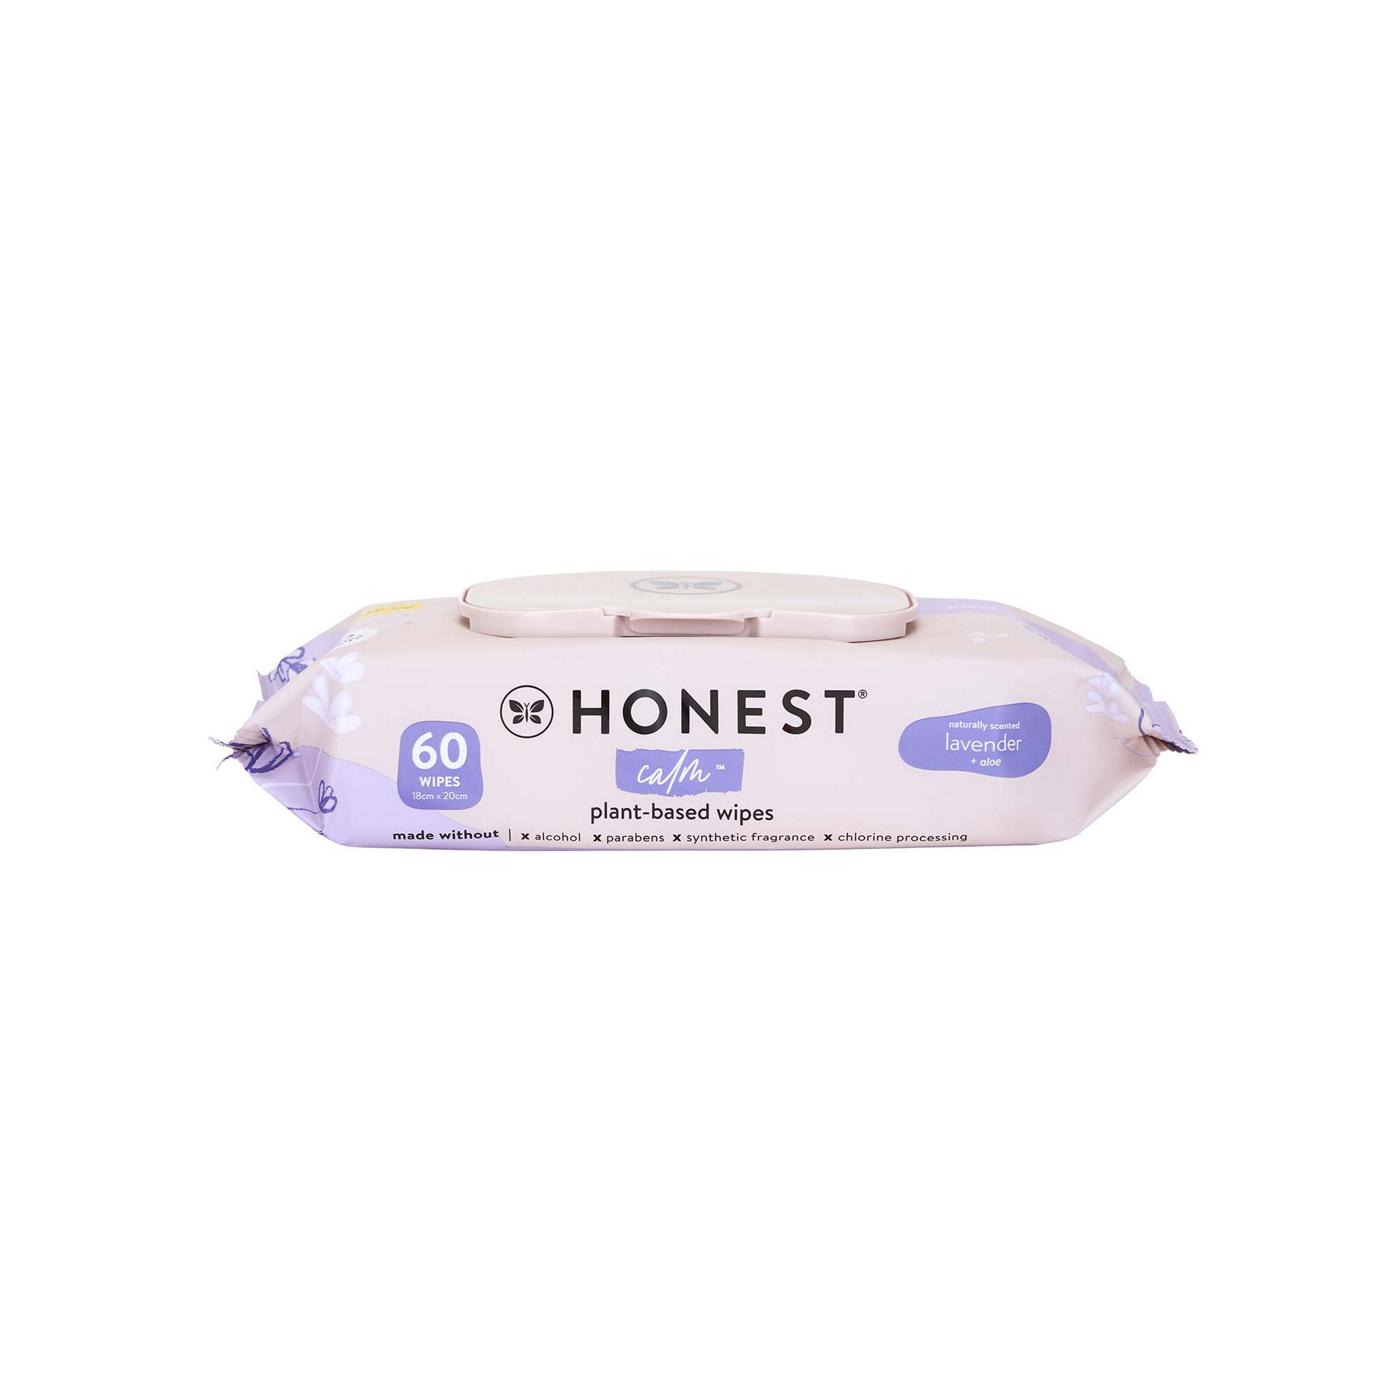 The Honest Company Calm Plant-Based Wipes - Lavender; image 1 of 4